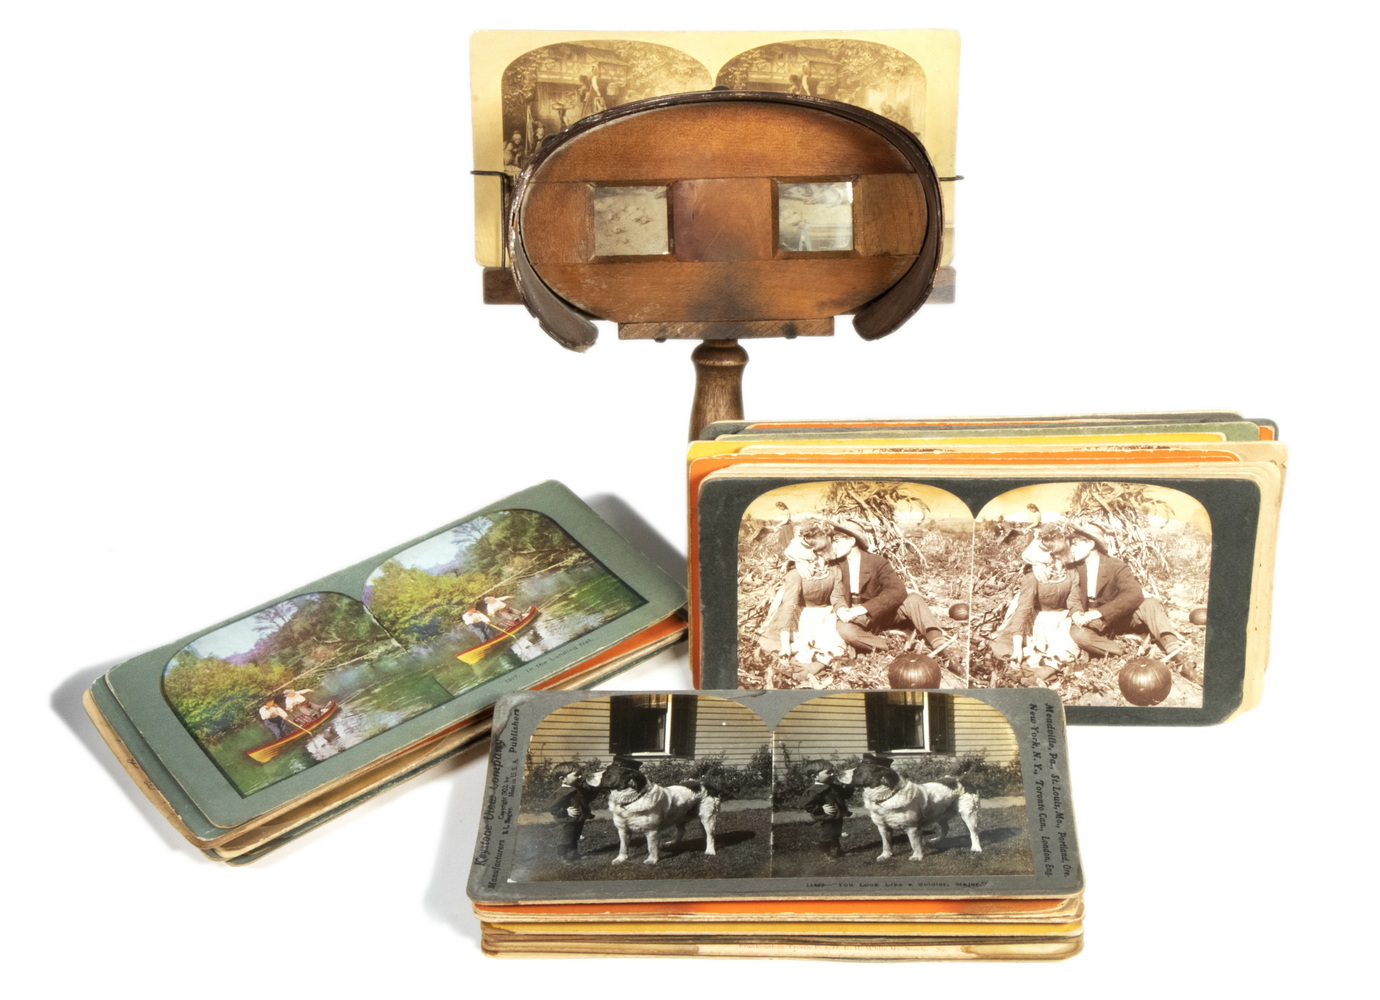 VINTAGE STEREOSCOPE VIEWER WITH